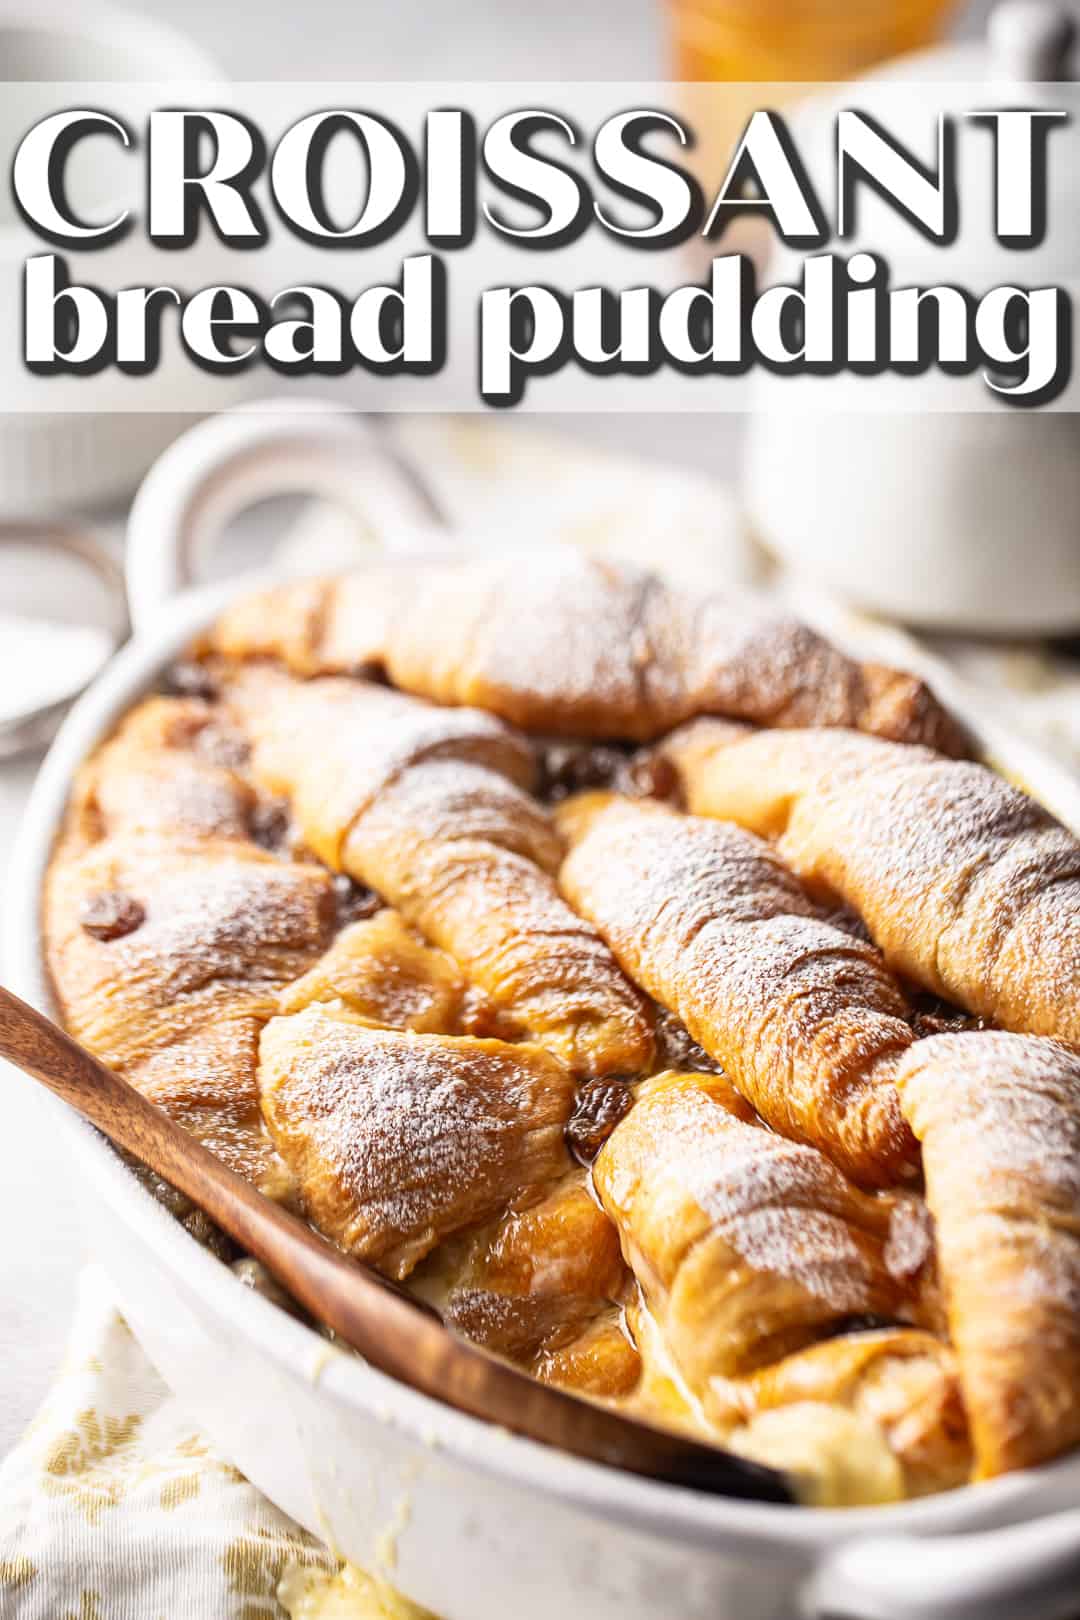 Croissant bread pudding recipe, prepared and presented on a white background with a dusting of powdered sugar.